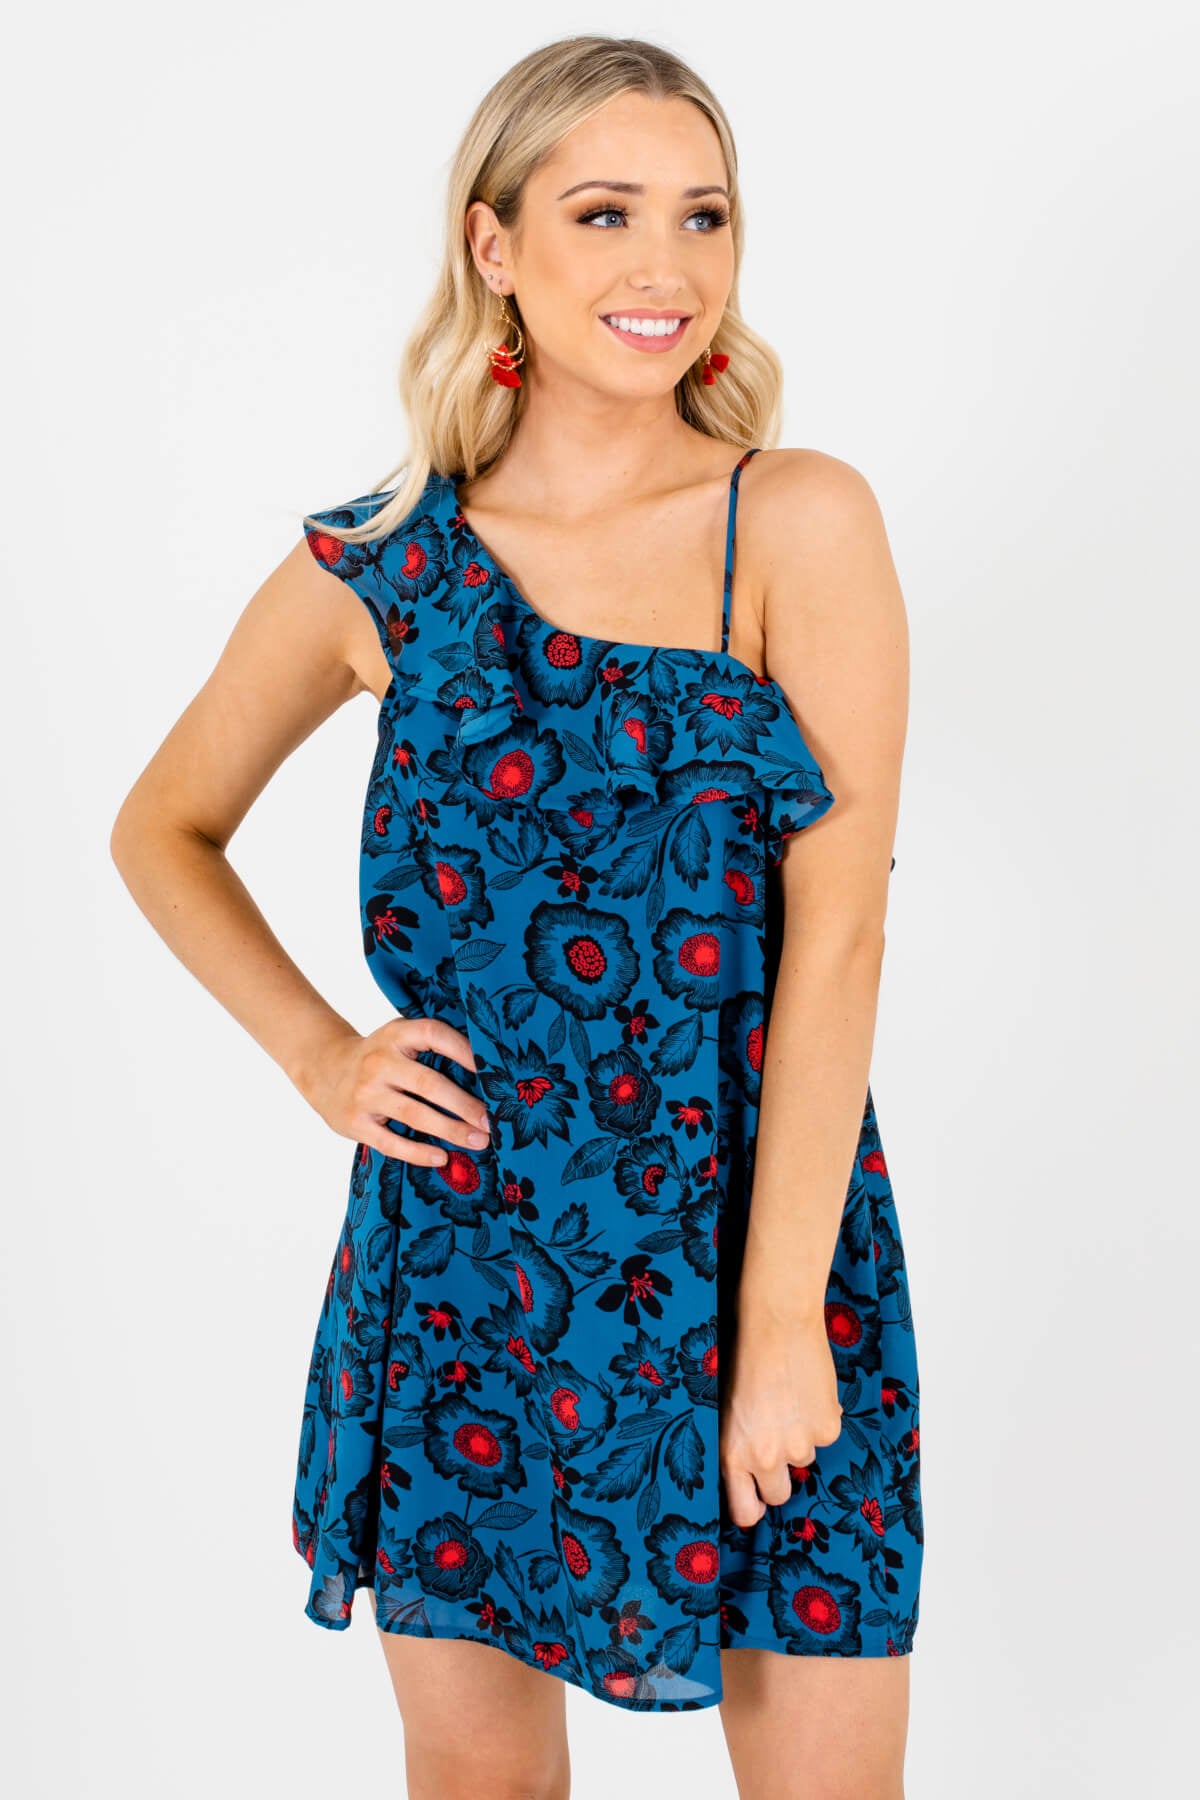 Teal Blue Multicolored Floral Patterned Boutique Mini Dresses for Women